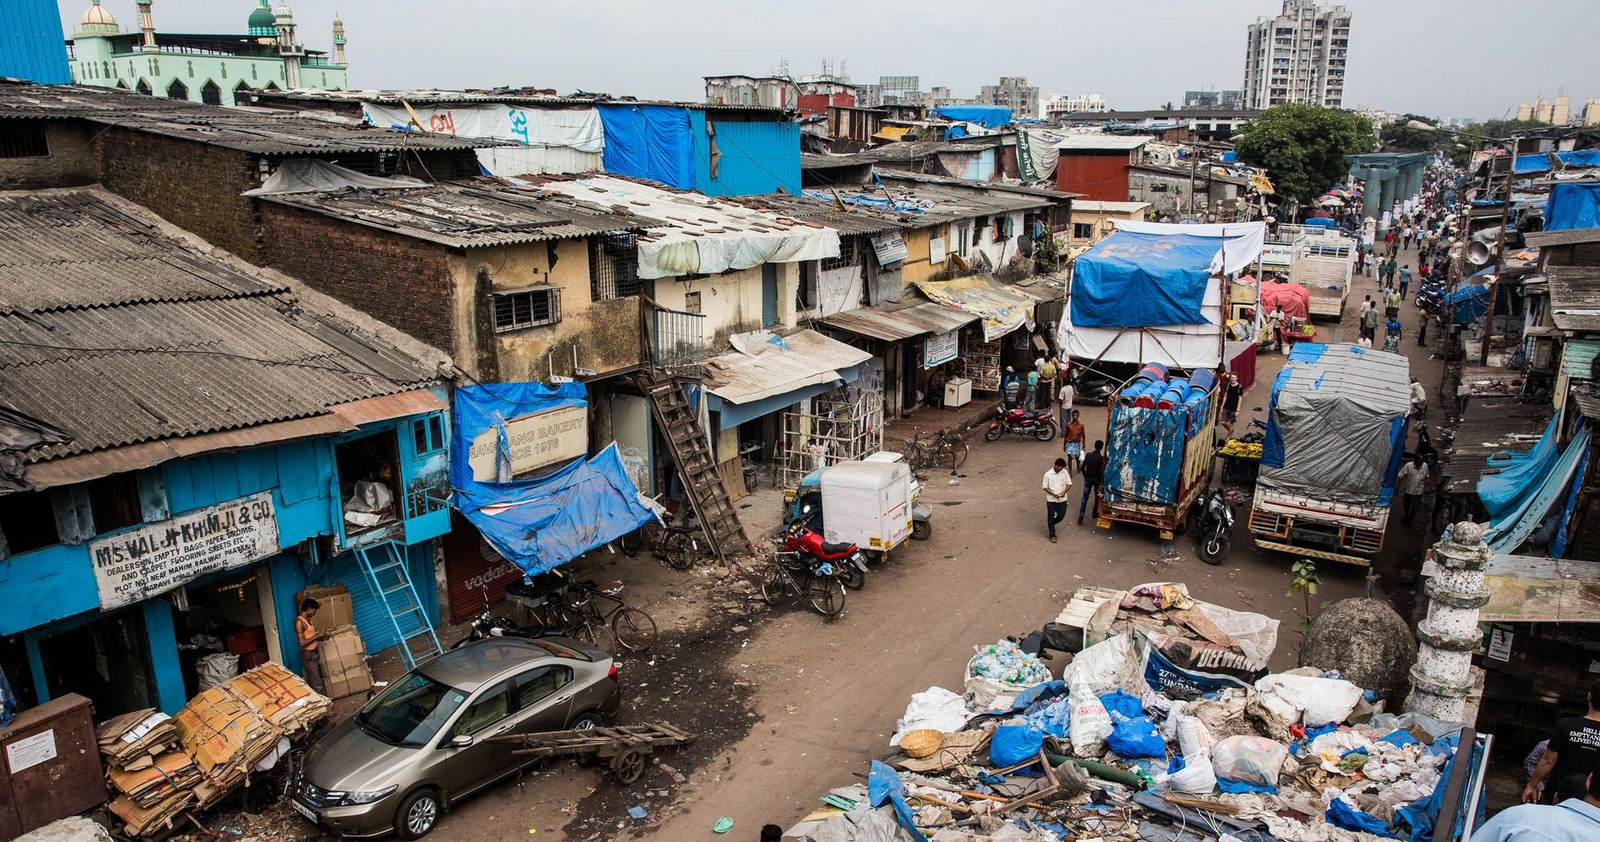 An overview of Slum redevelopment in India - Sheet2